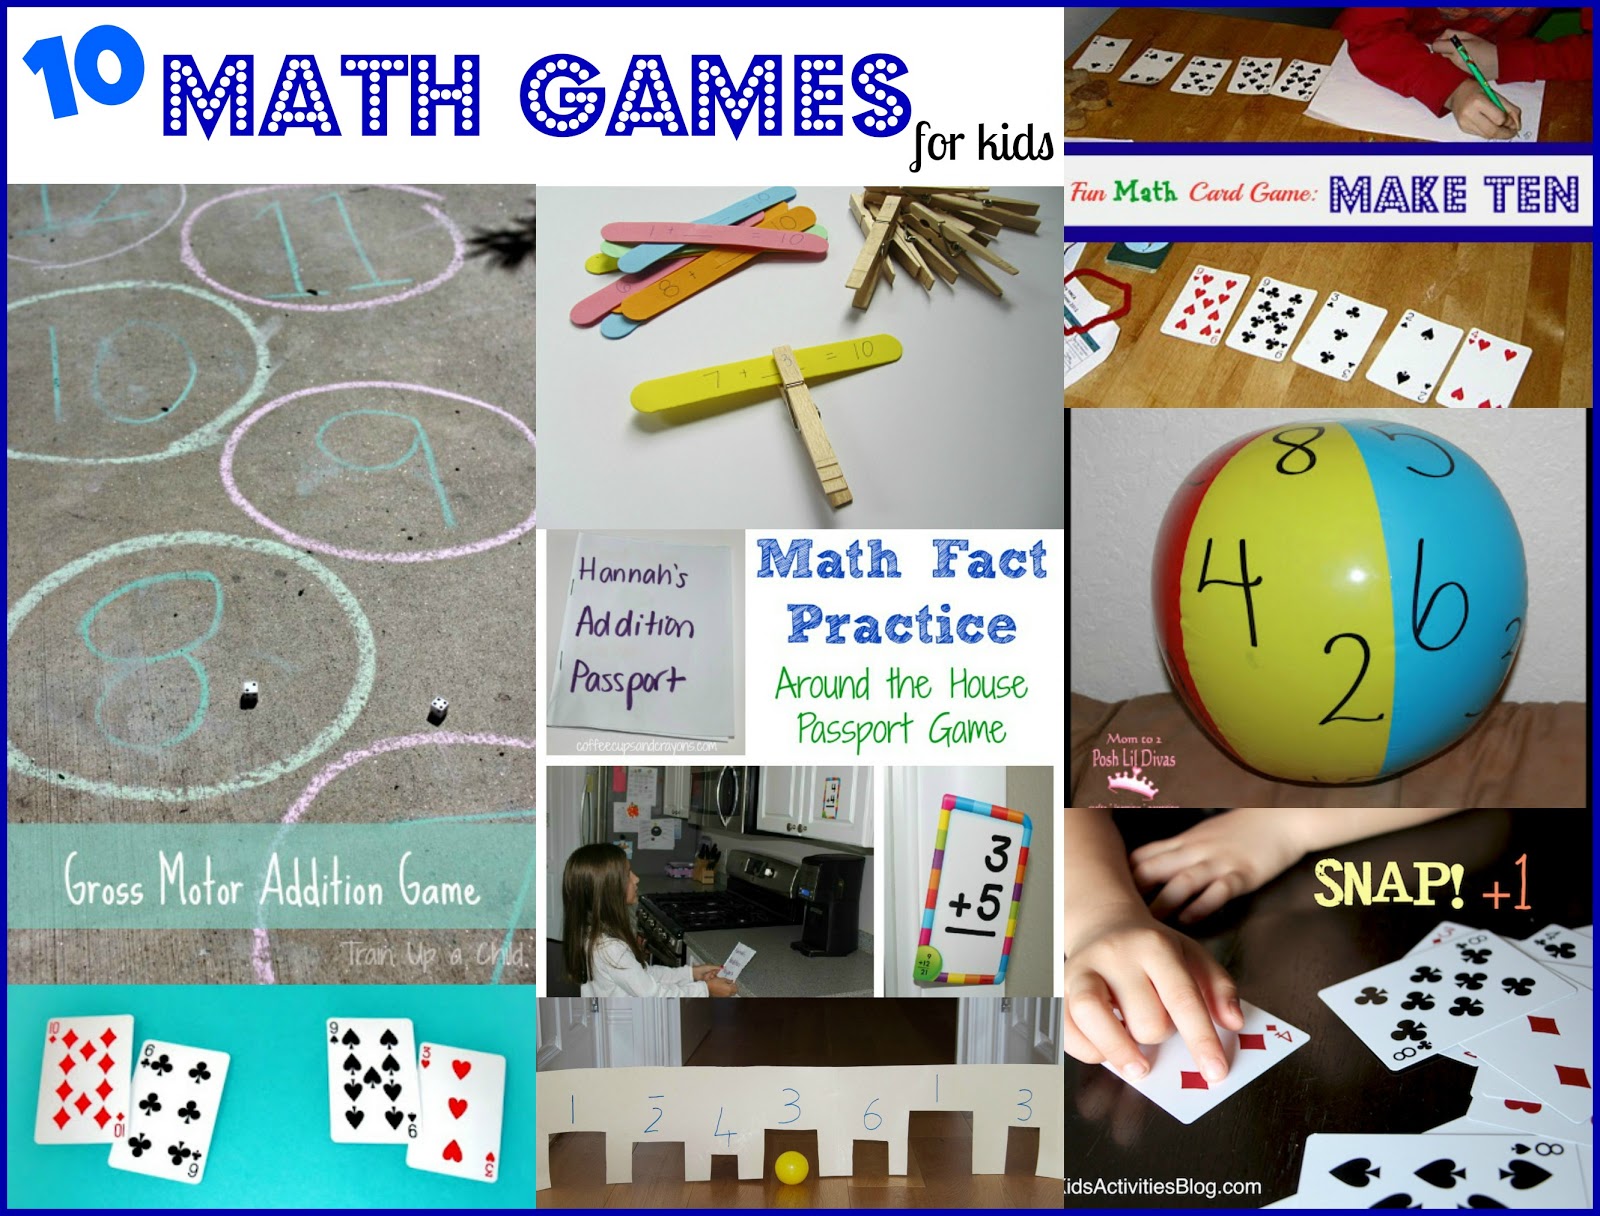 What are some fun online math games for 2nd graders?